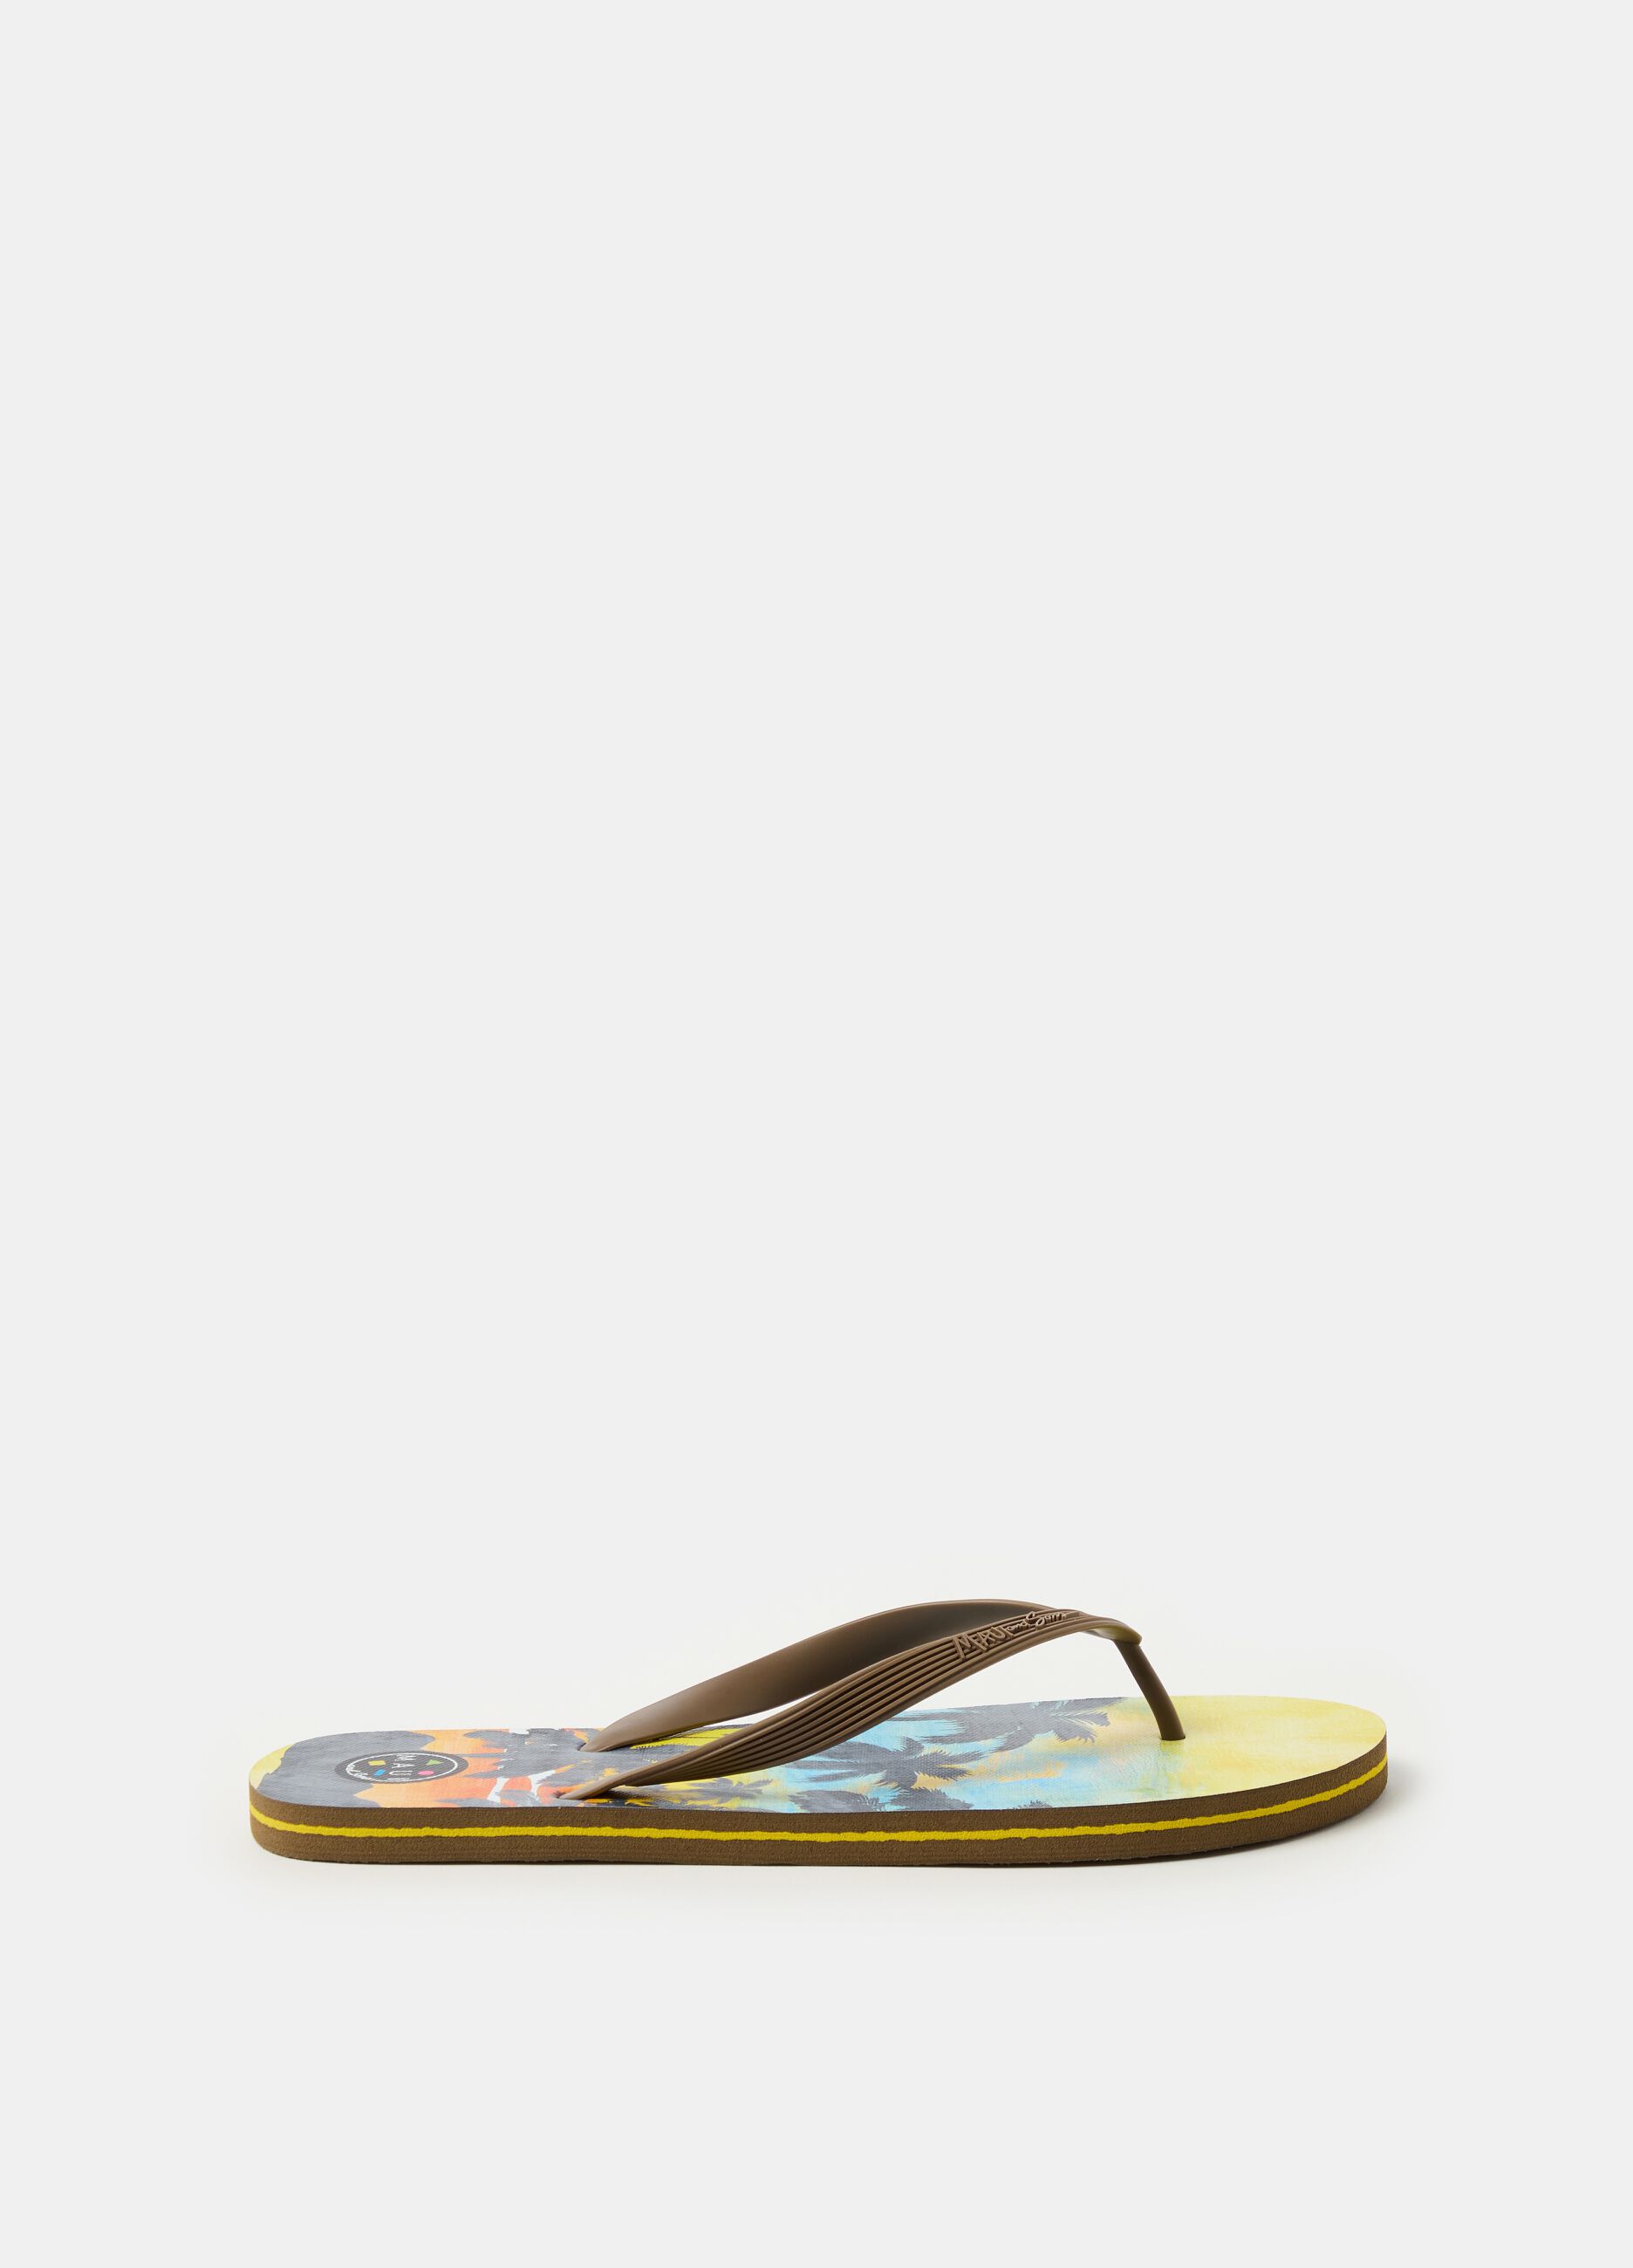 Thong sandals with palm tree print